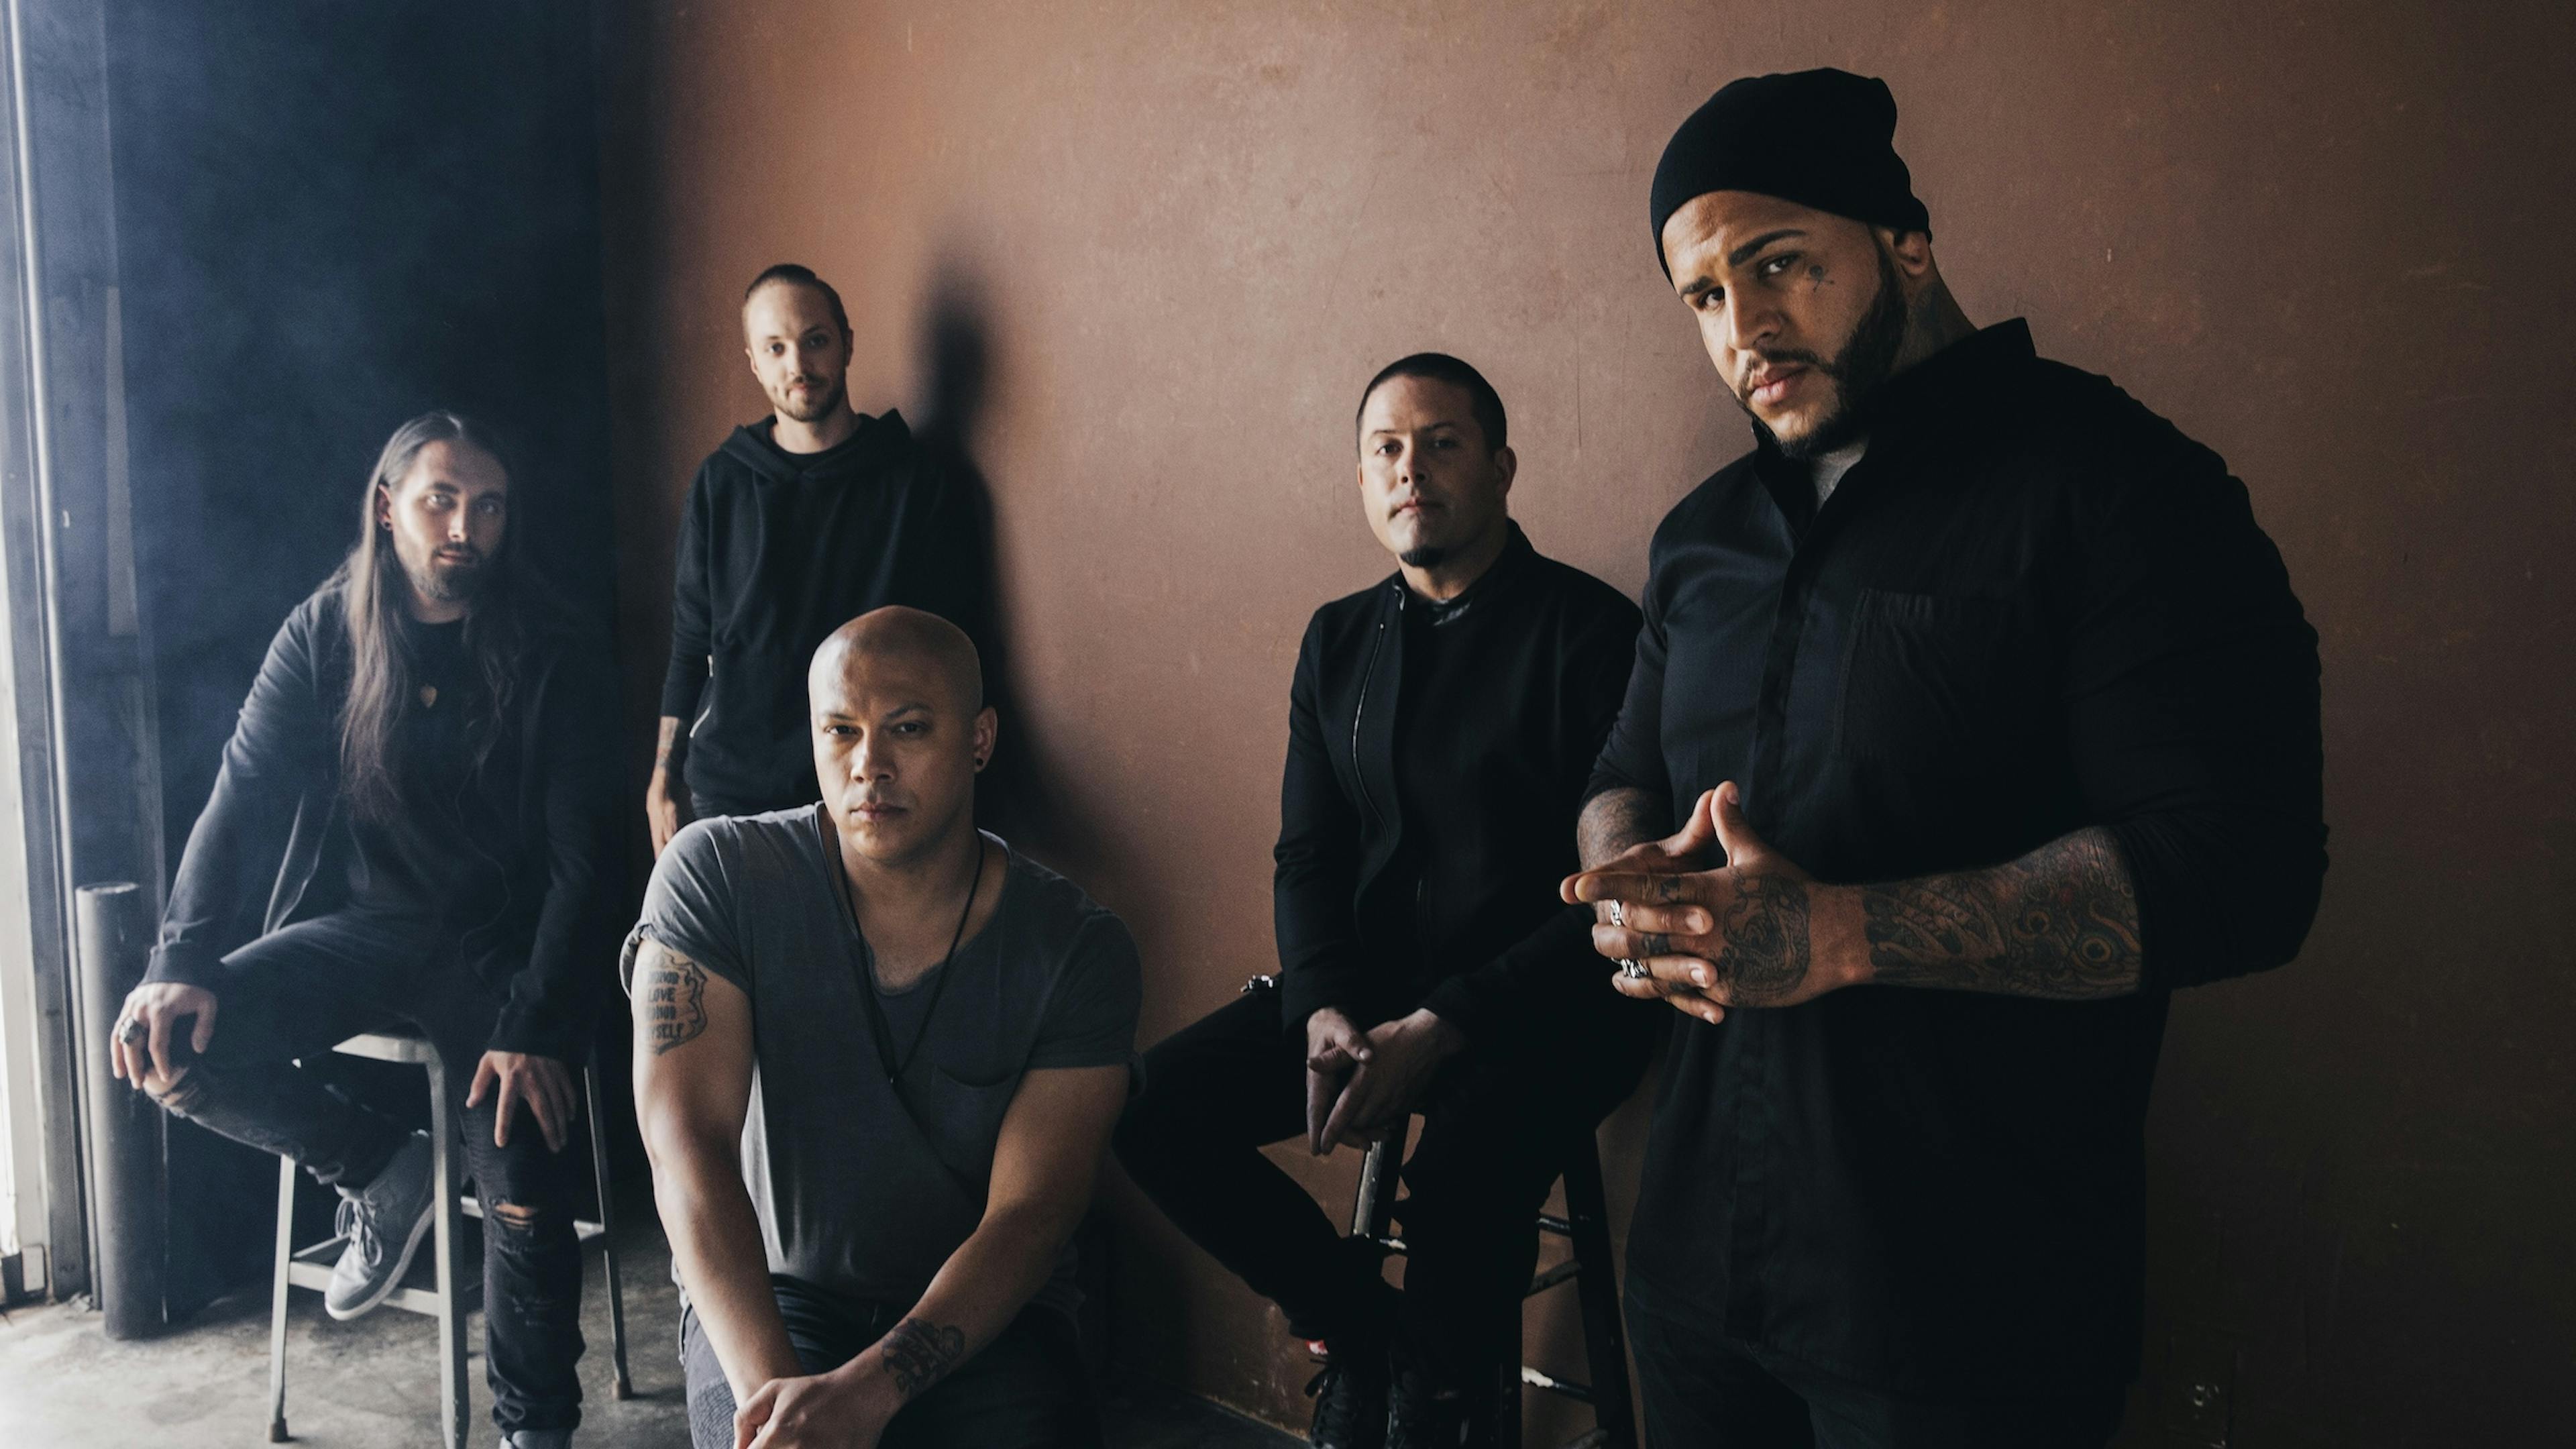 Bad Wolves say split with Tommy Vext is "not about cancel culture"